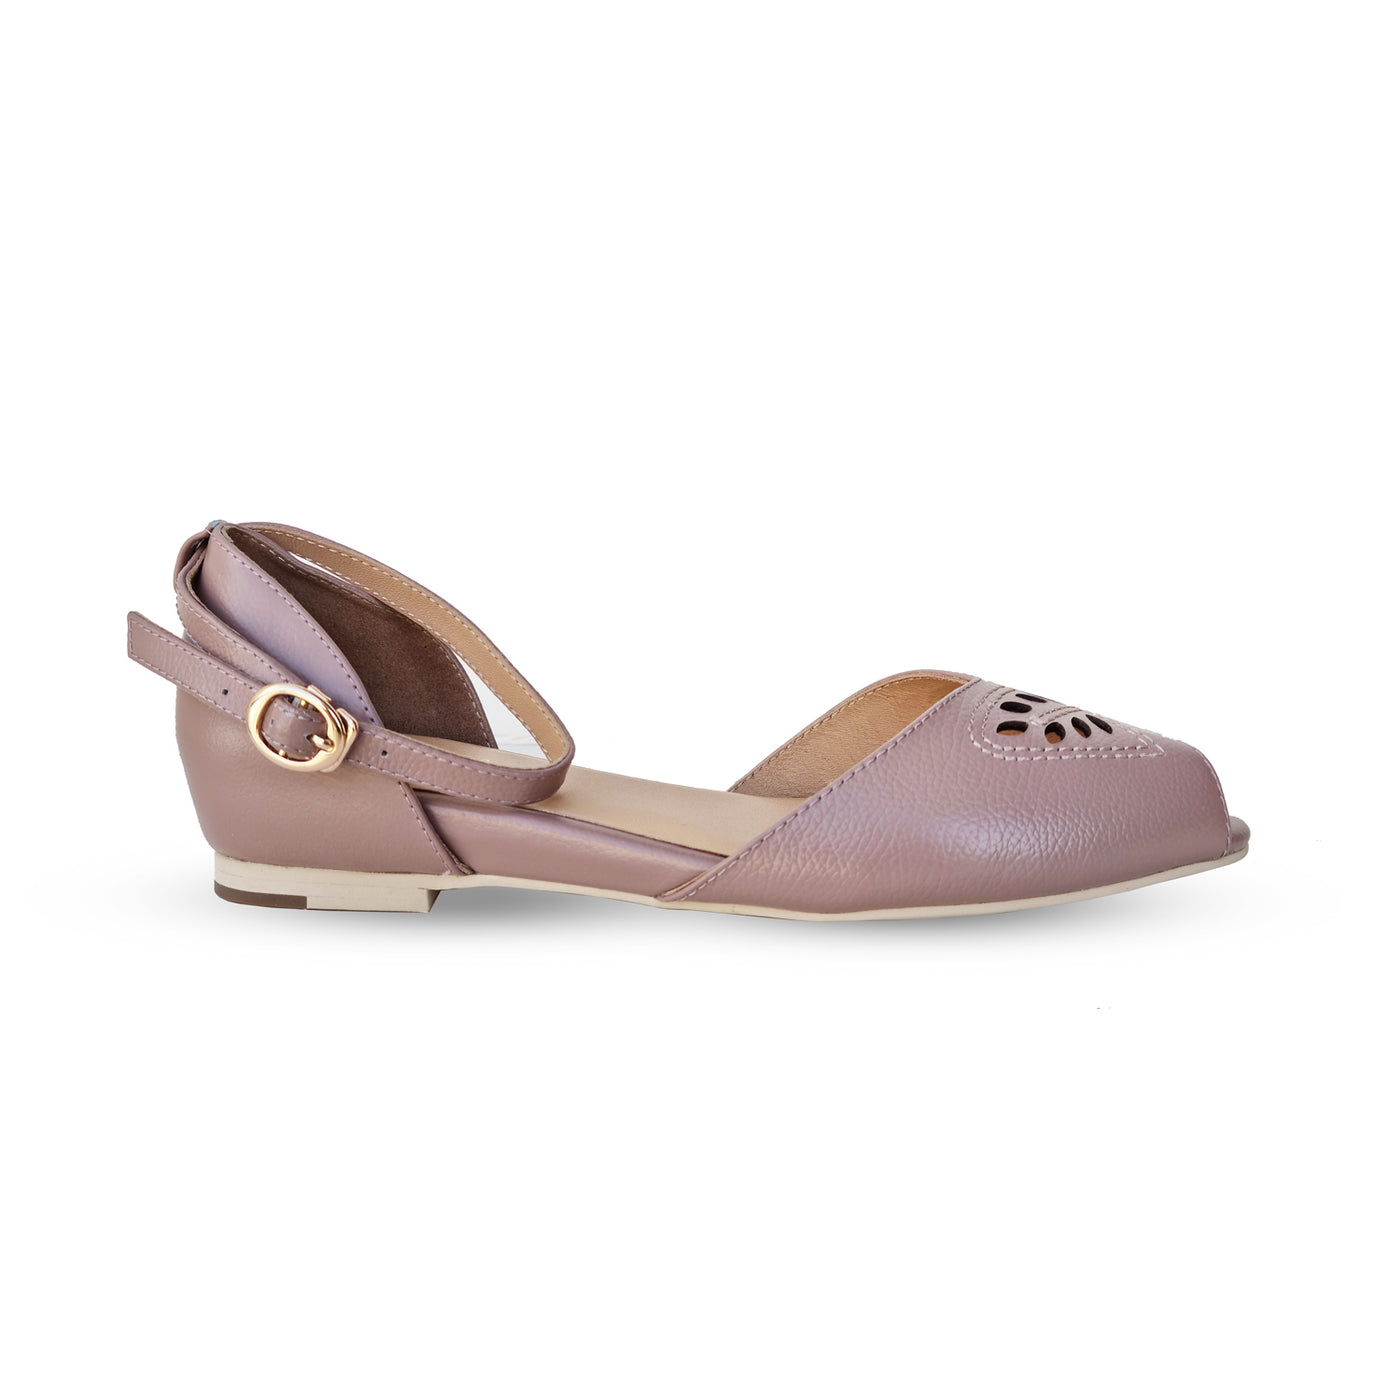 Charlie Stone Vintage Inspired Flats Retro 1940’s 1950’s Style Ladies Shoes taupe ballerina